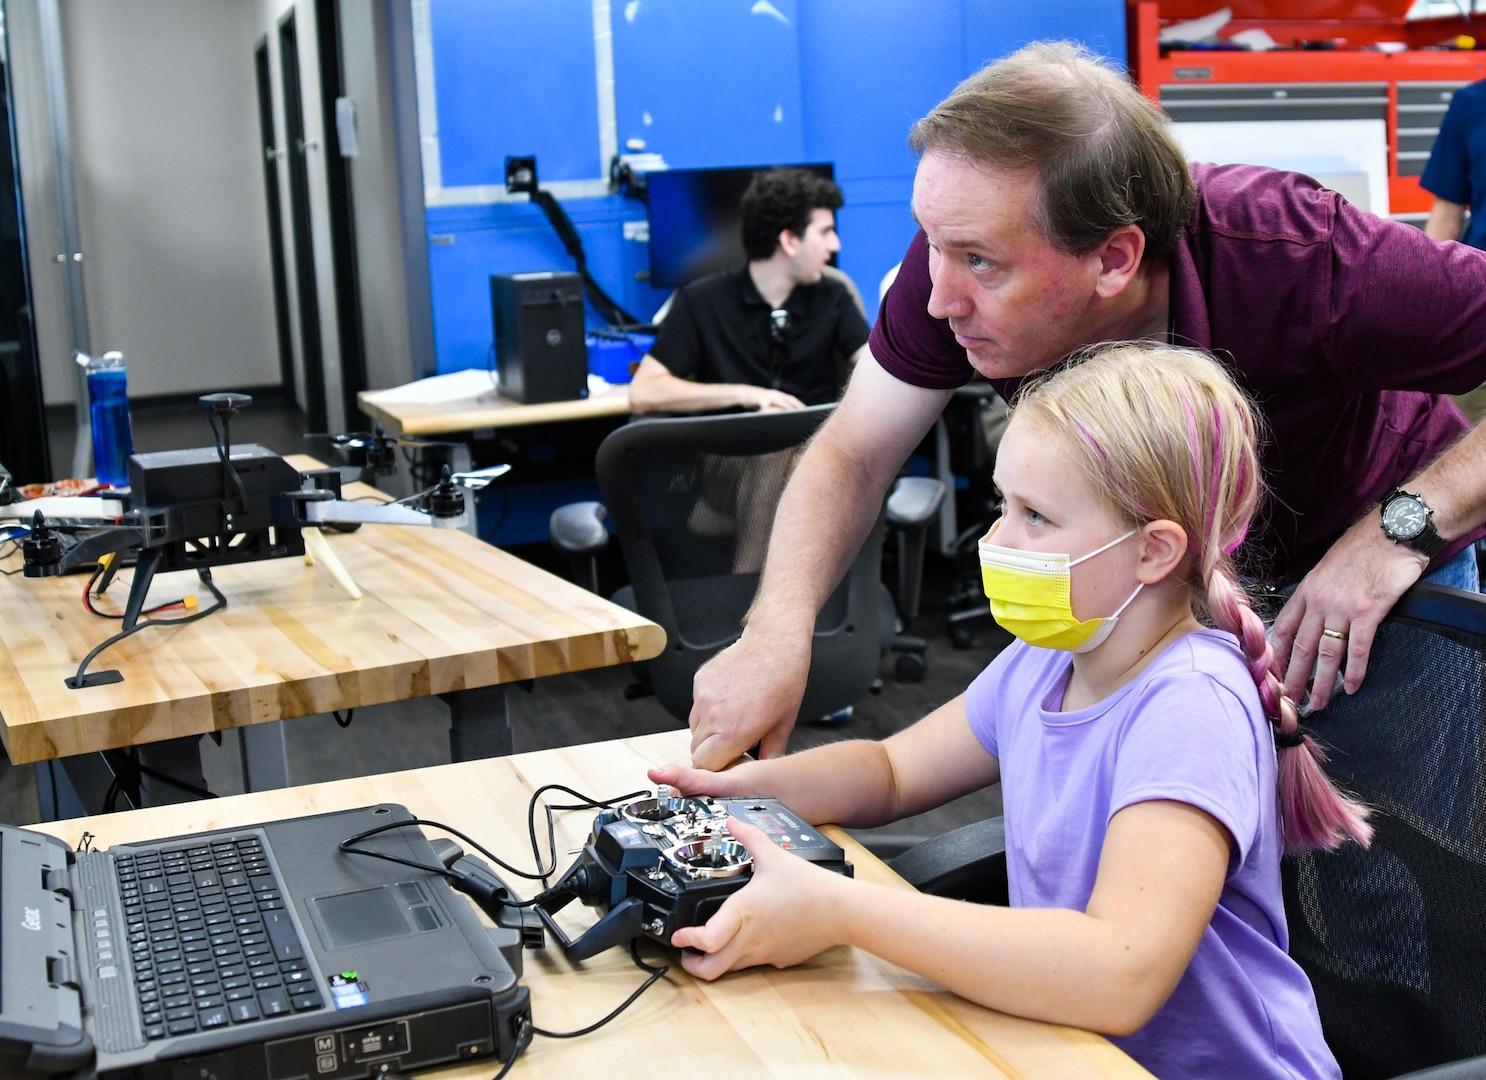 IMAGE: Weapons Control and Integration Department Mechanical Engineer Ian Shafer helps Eliana Shipley, 9, pilot a virtual reality-based drone during the Bring Your Child to Work Day event, Aug. 2. The department demonstrated various 3D printing technologies and how they allow for rapid prototyping of unmanned aerial systems.